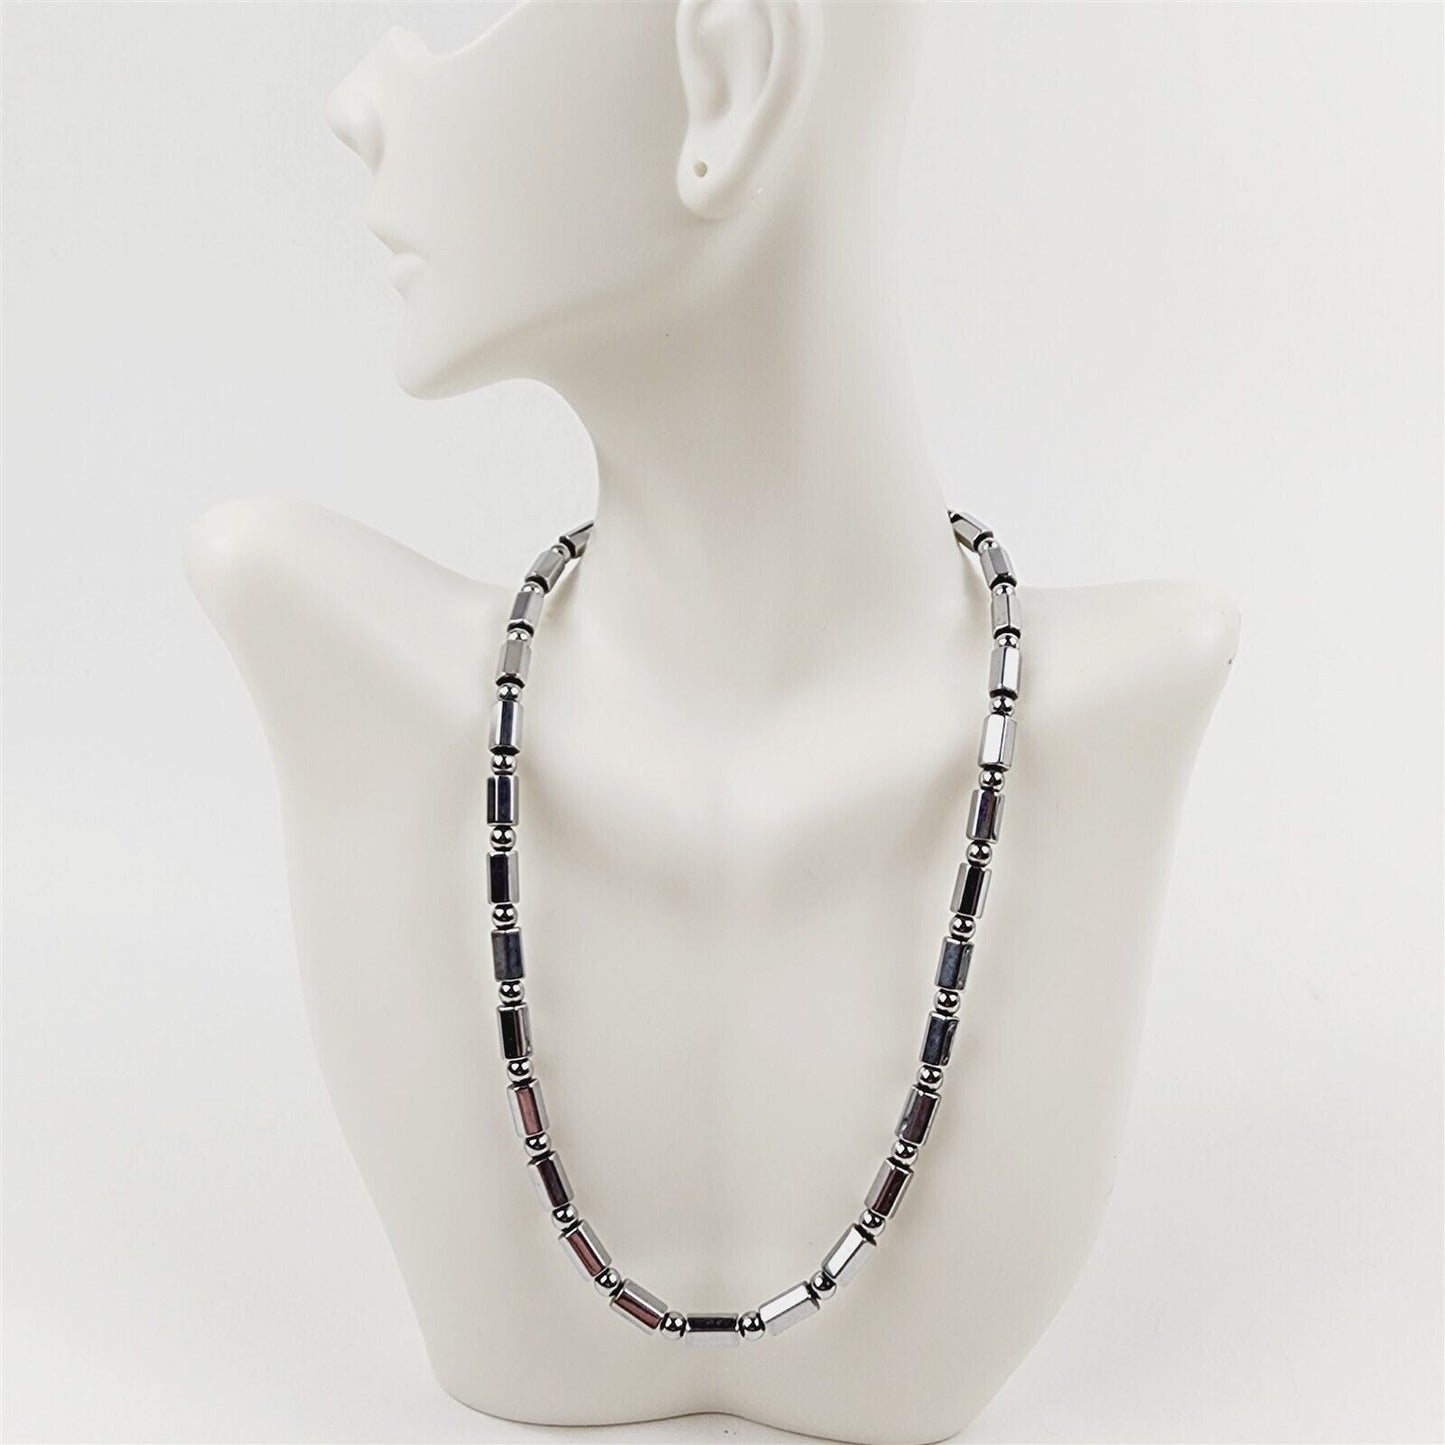 Silver Hex Magnetic Beaded Necklace Therapeutic Handmade